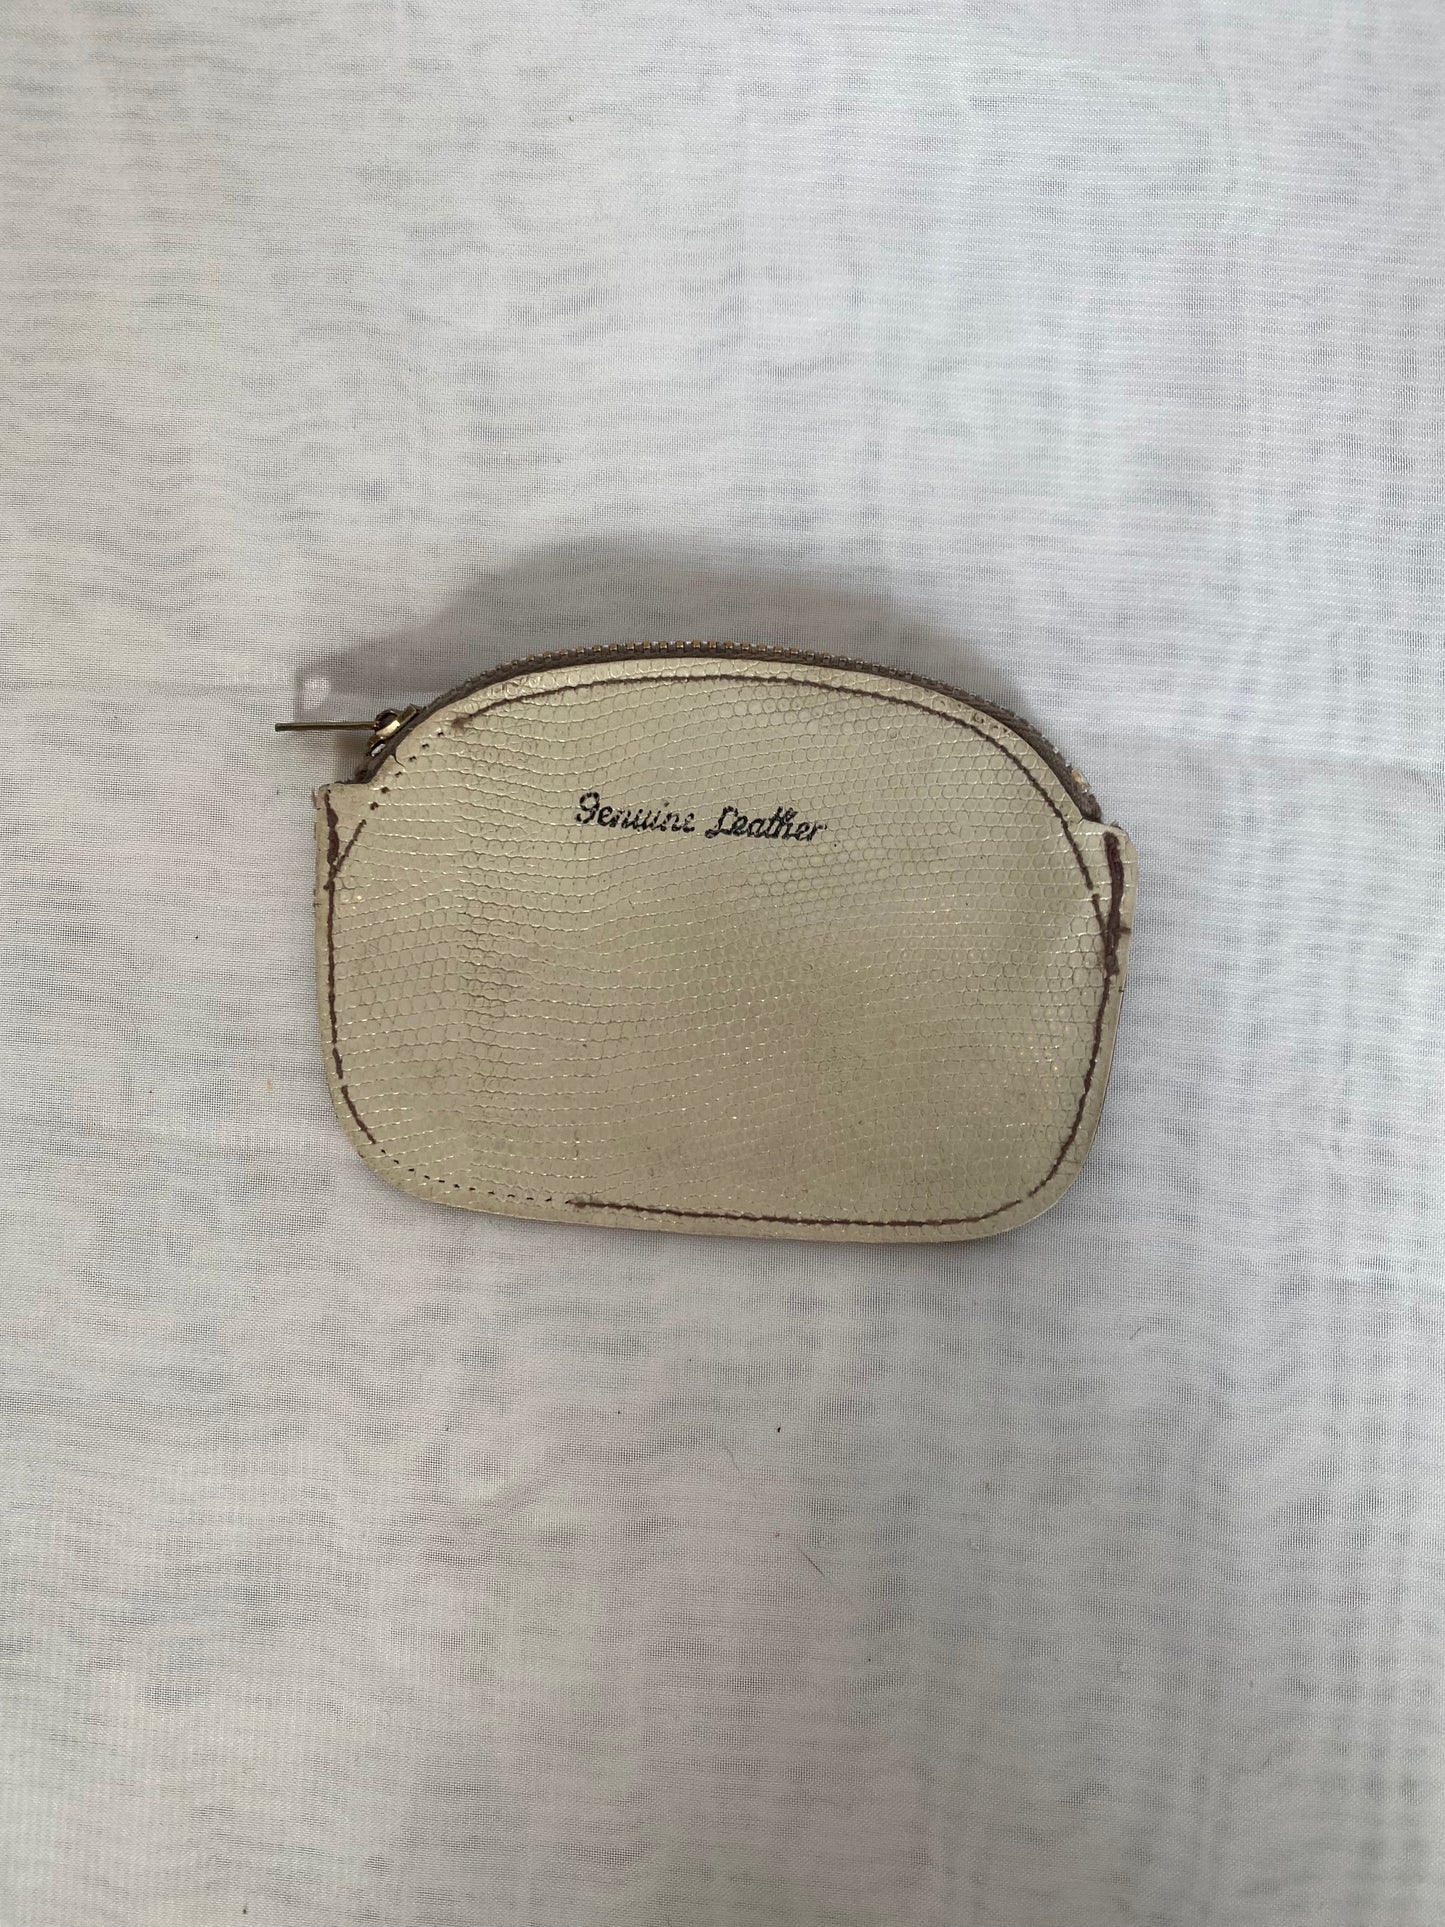 Genuine leather coin purse